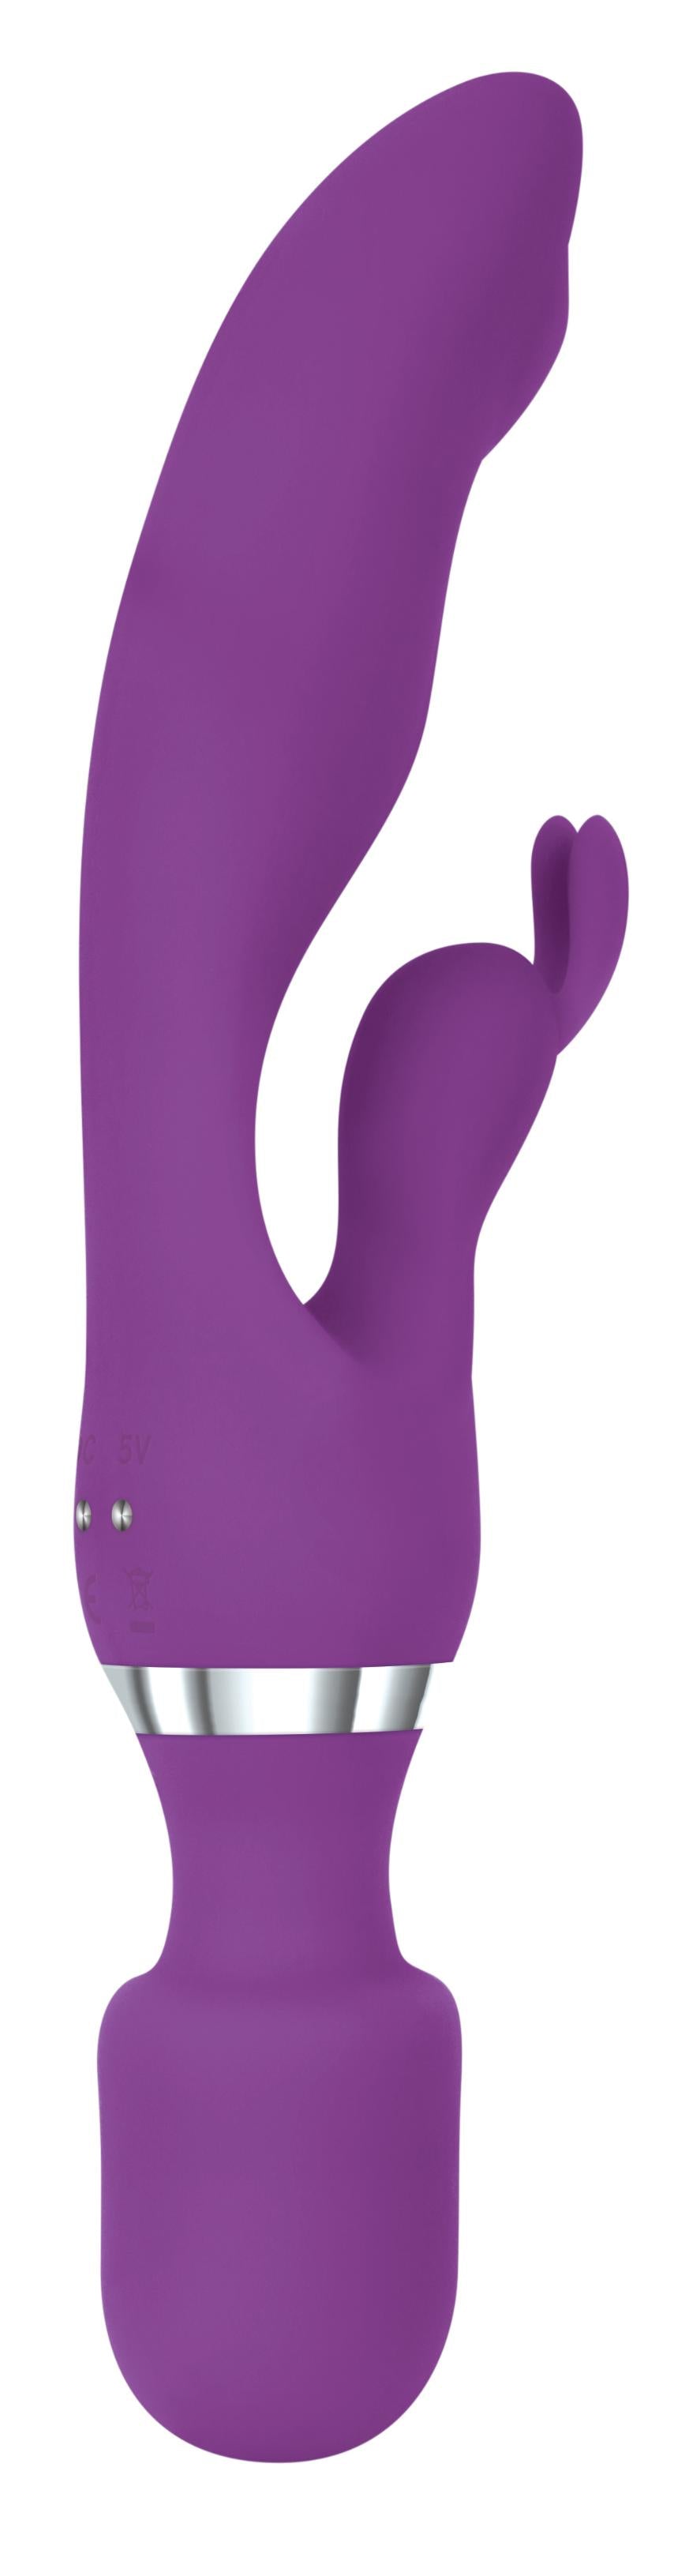 The G-Motion Rabbit Wand